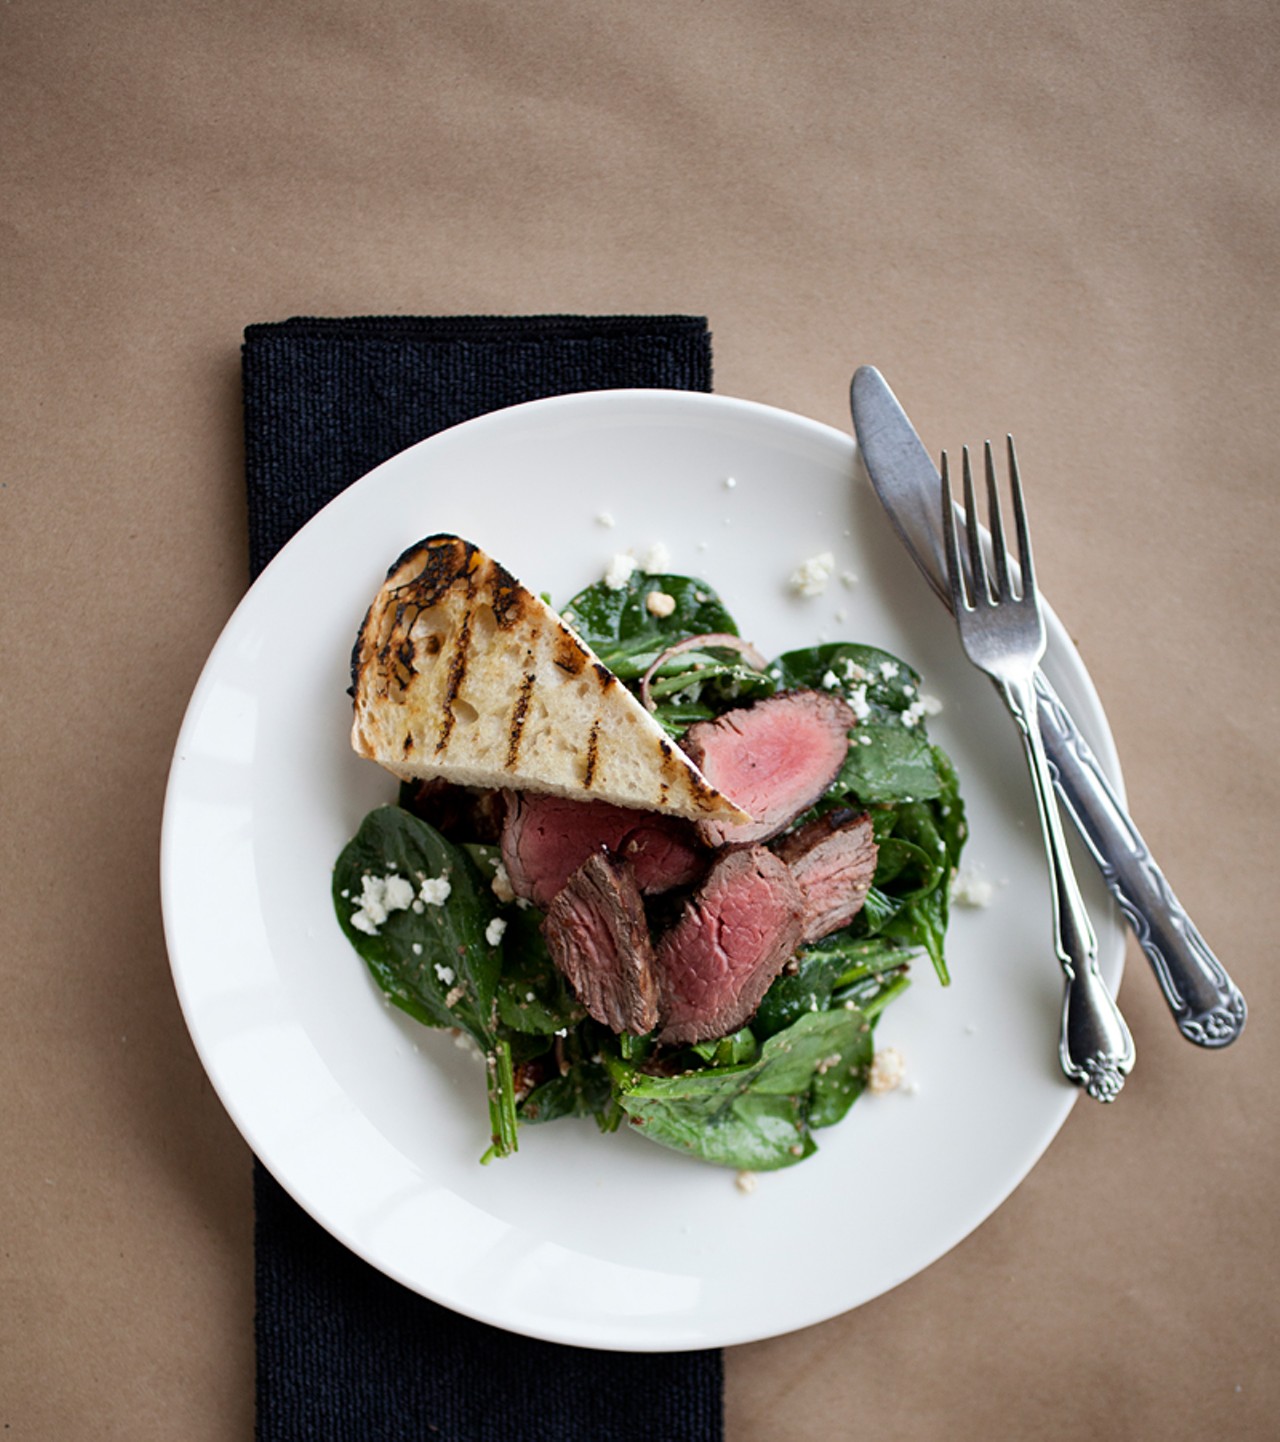 Steak and spinach salad with feta, red onion, roasted tomatoes, grilled beef tenderloin, and balsamic dressing.